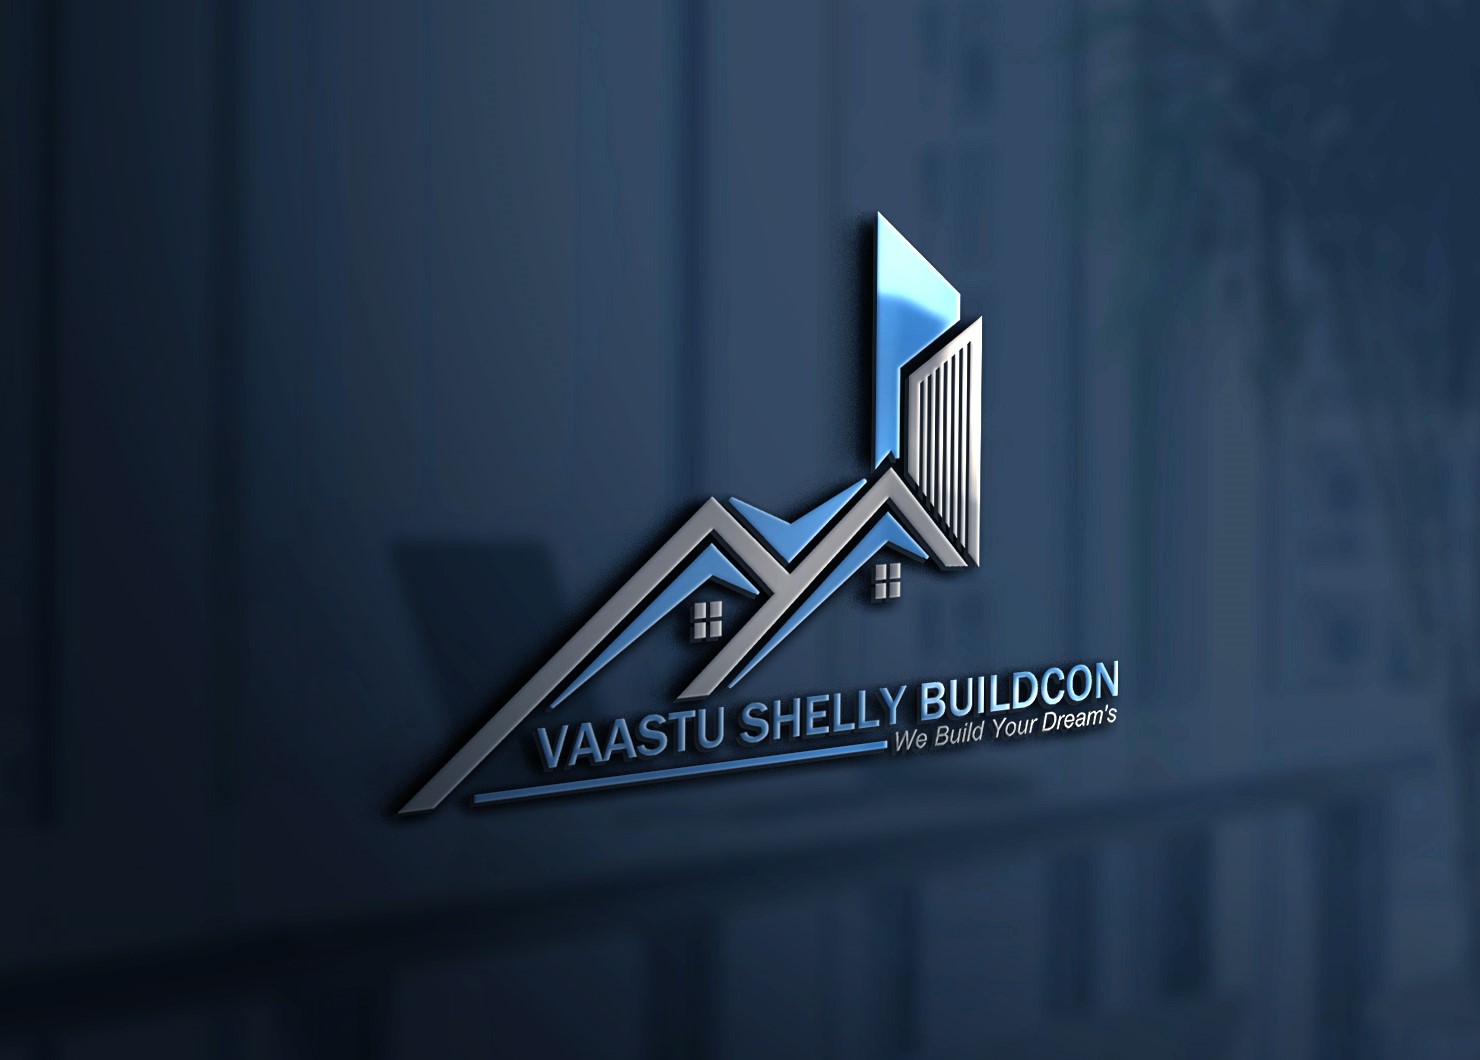 Vaastu Shelly Buildcon|Accounting Services|Professional Services